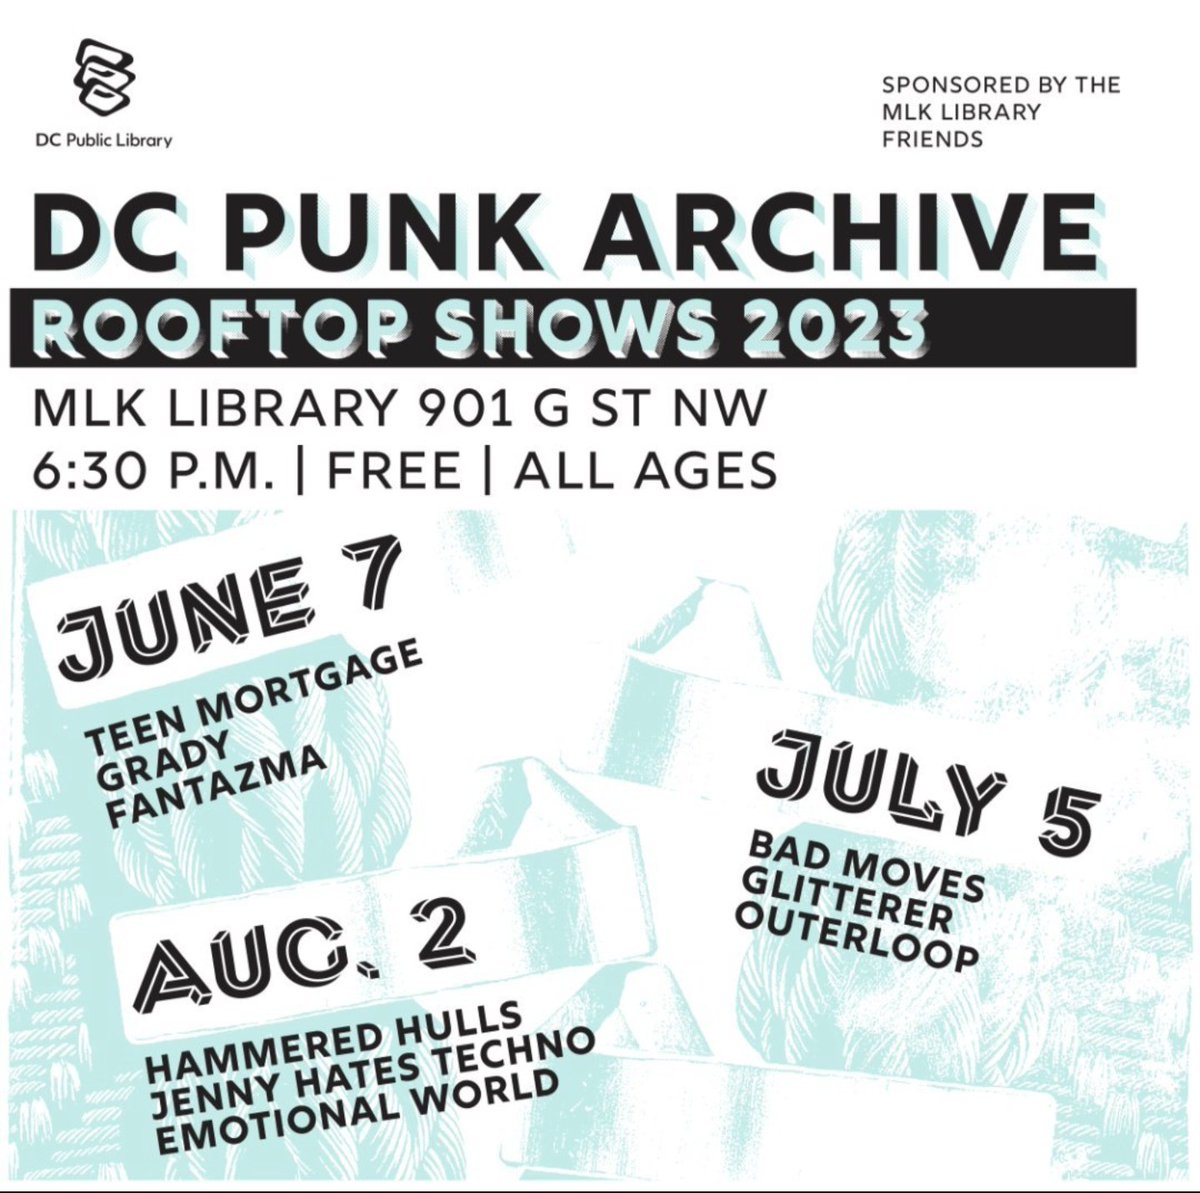 Happy Bad Moves at the DC Punk Archive's Rooftop Show Series Day! We're rockin the roof of MLK Library TONIGHT for FREE! Music starts at 6:30 and you don't wanna miss @outerloopNOVA or @glitterererer so turn up early! See you there! 📸: @alecpugliese